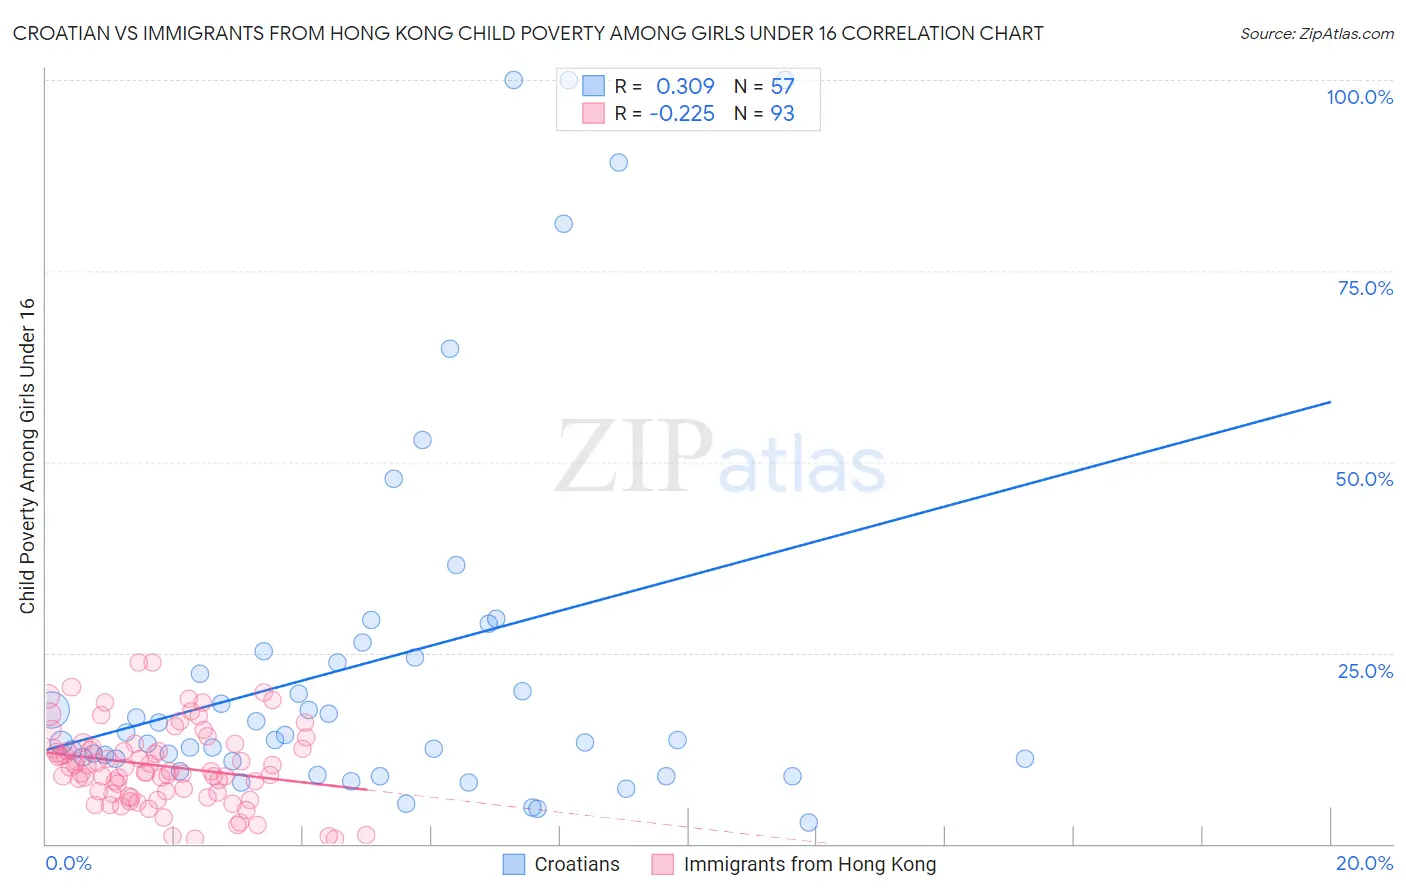 Croatian vs Immigrants from Hong Kong Child Poverty Among Girls Under 16